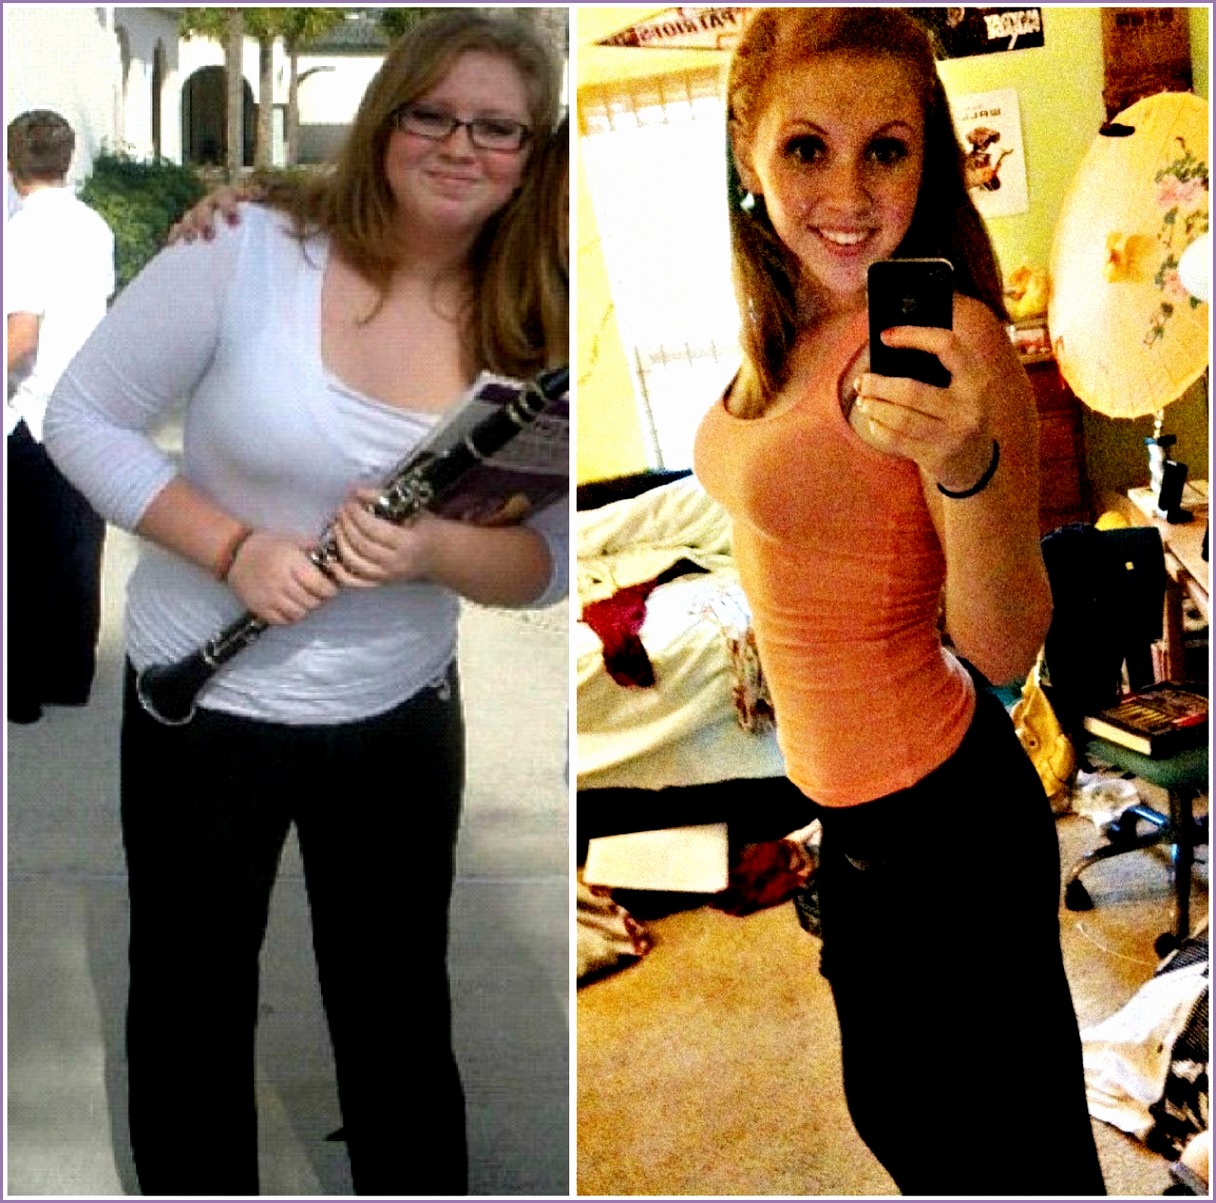 Weight Loss Motivation The Most Amazing Female Weight Loss Transformations [30 Pics]